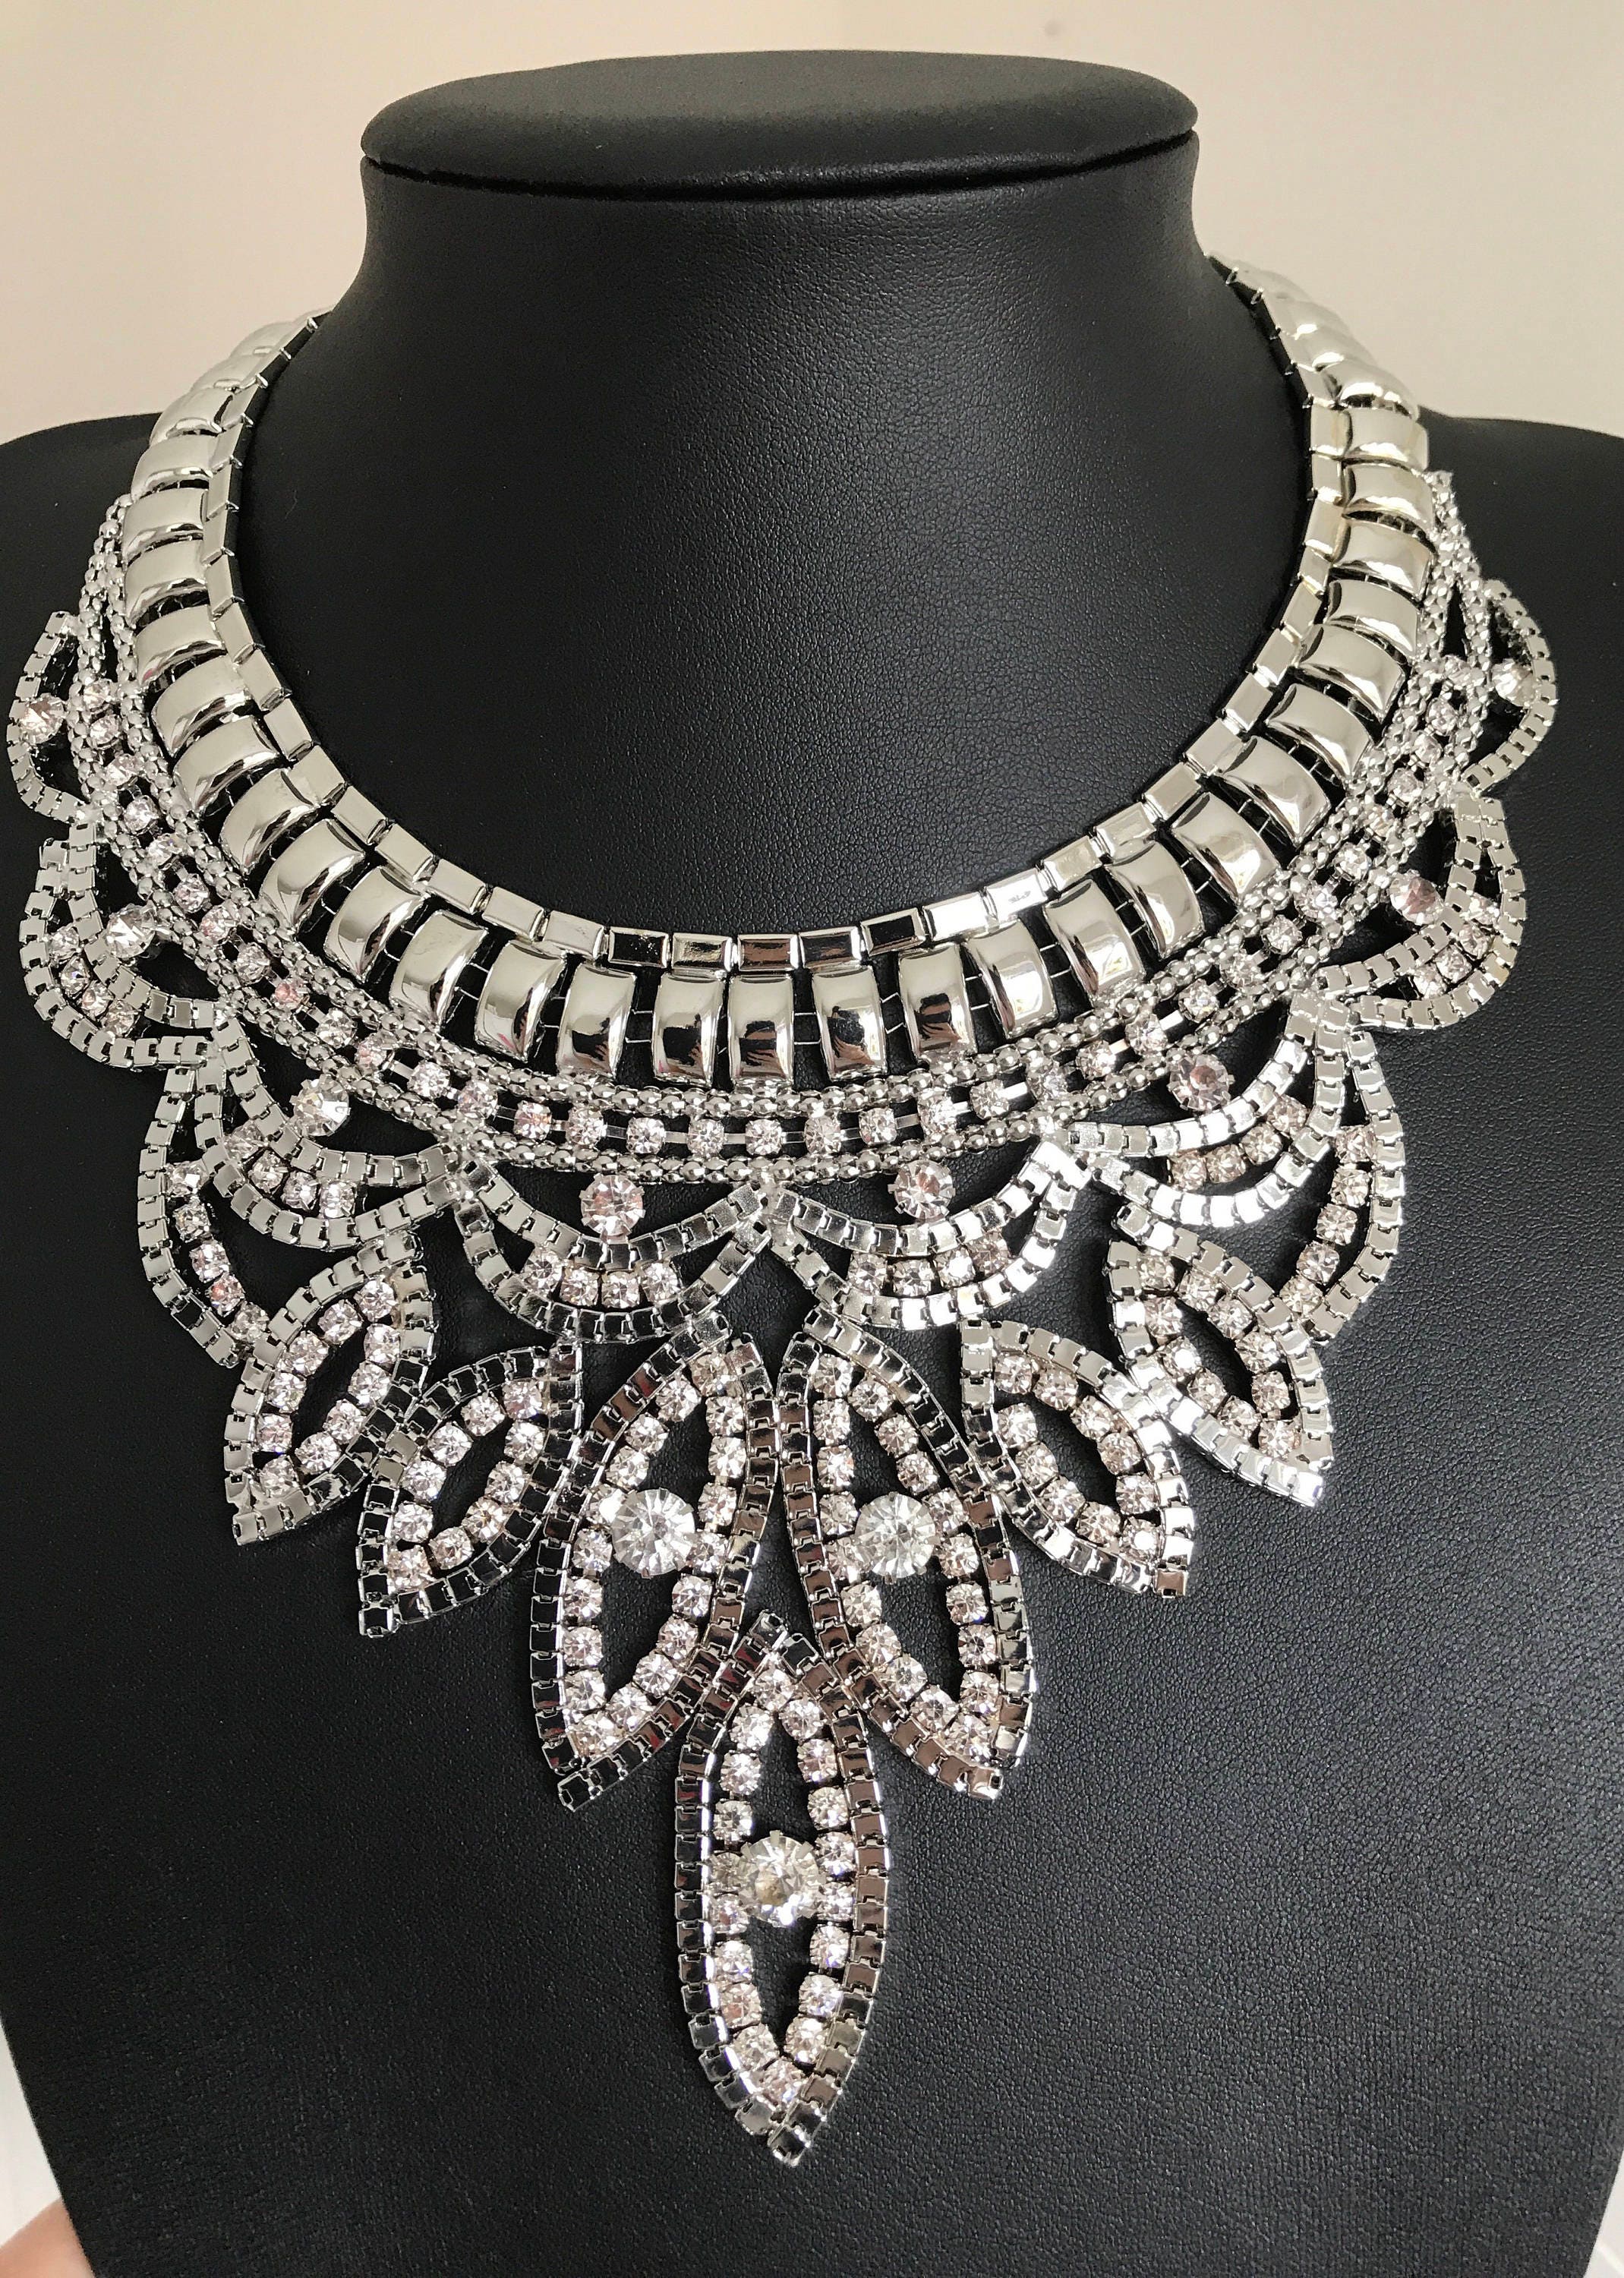 Beautuful large silver statement necklace